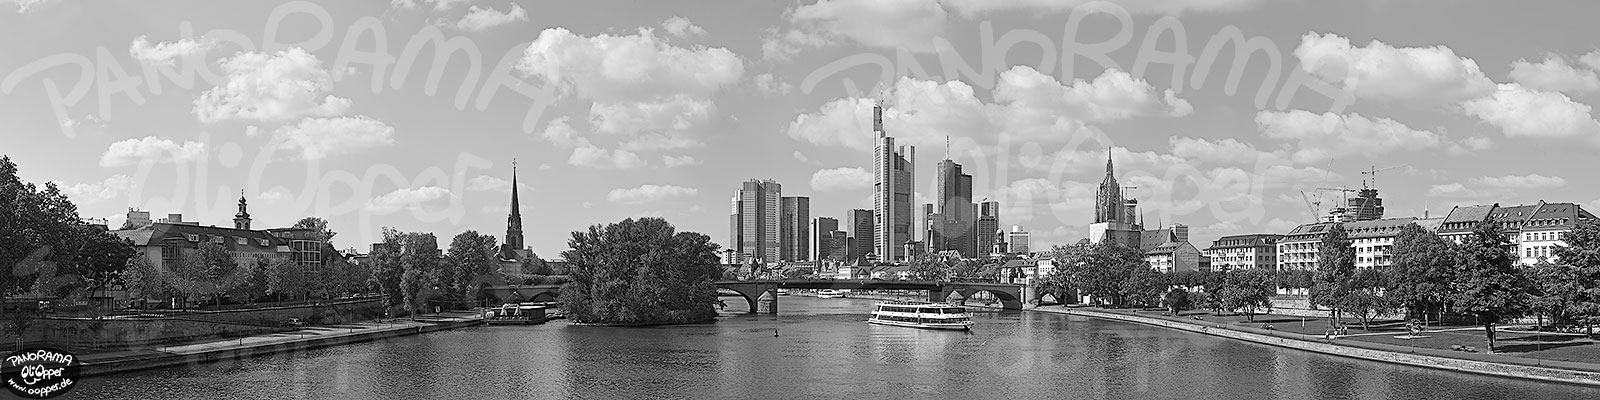 Panorama Frankfurt - Skyline am Tag - p8304 - (c) by Oliver Opper